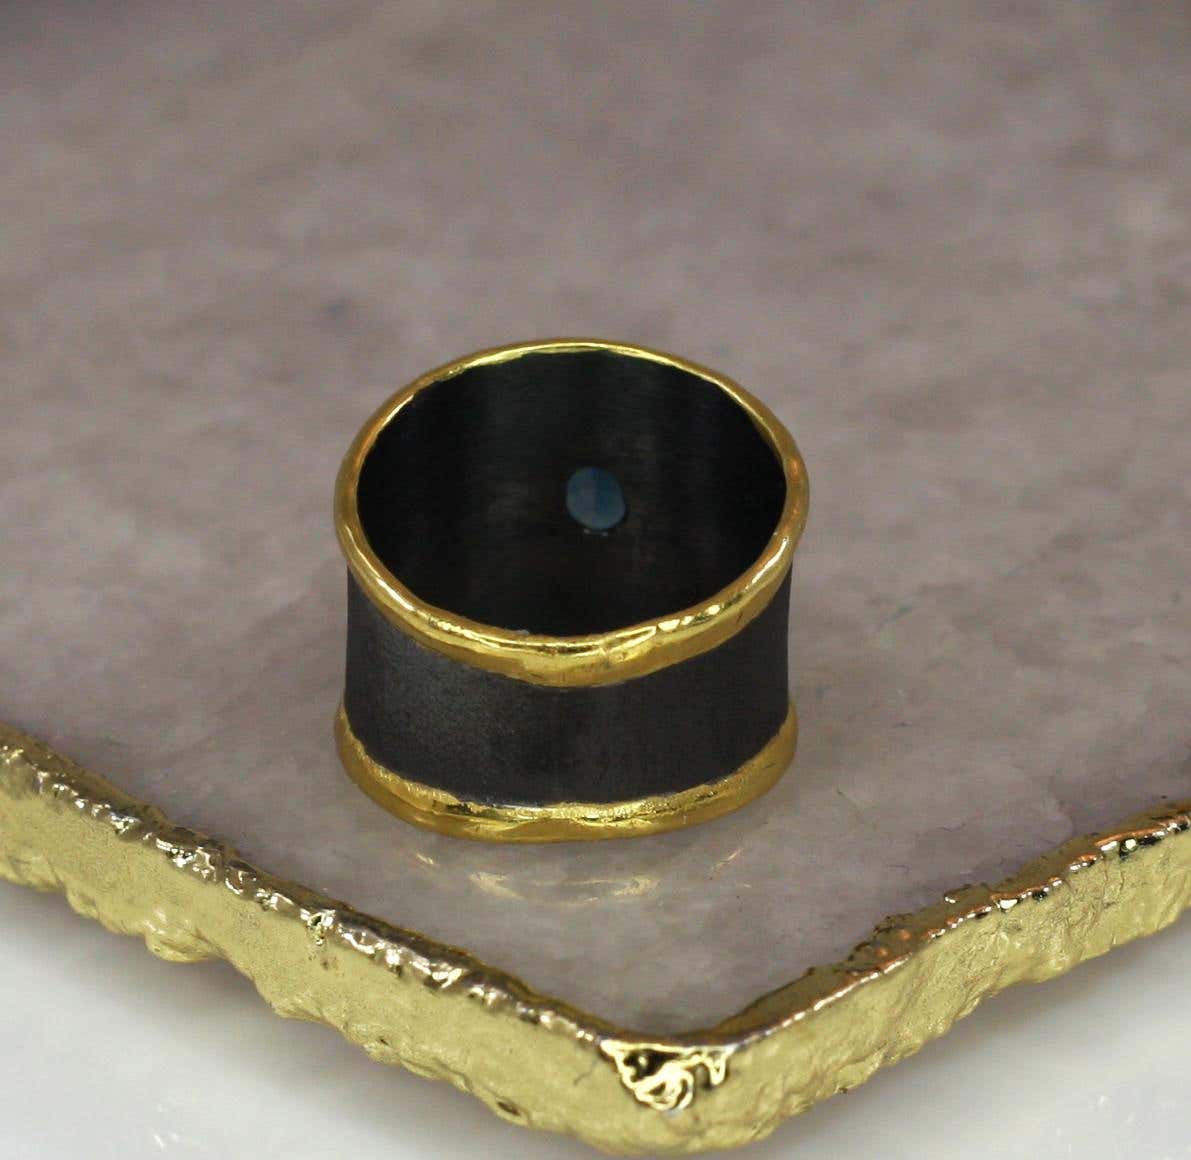 Eclyps Fine Silver Topaz Ring Finished with Pure Gold and Black Ruthenium